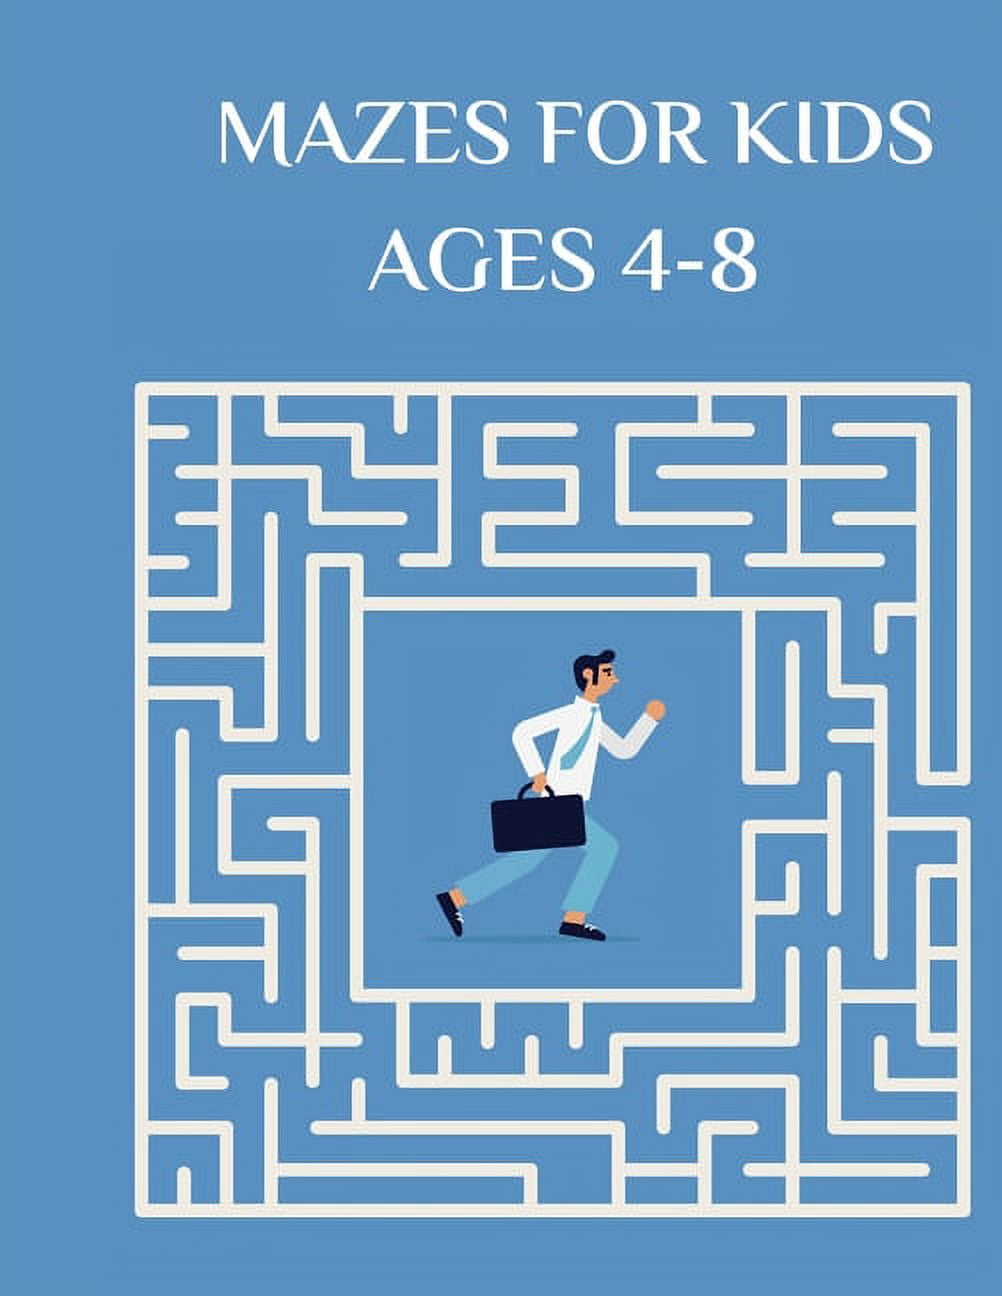 Mazes For Kids Ages 4-6: Fun Maze Activity Book by BrainBloom